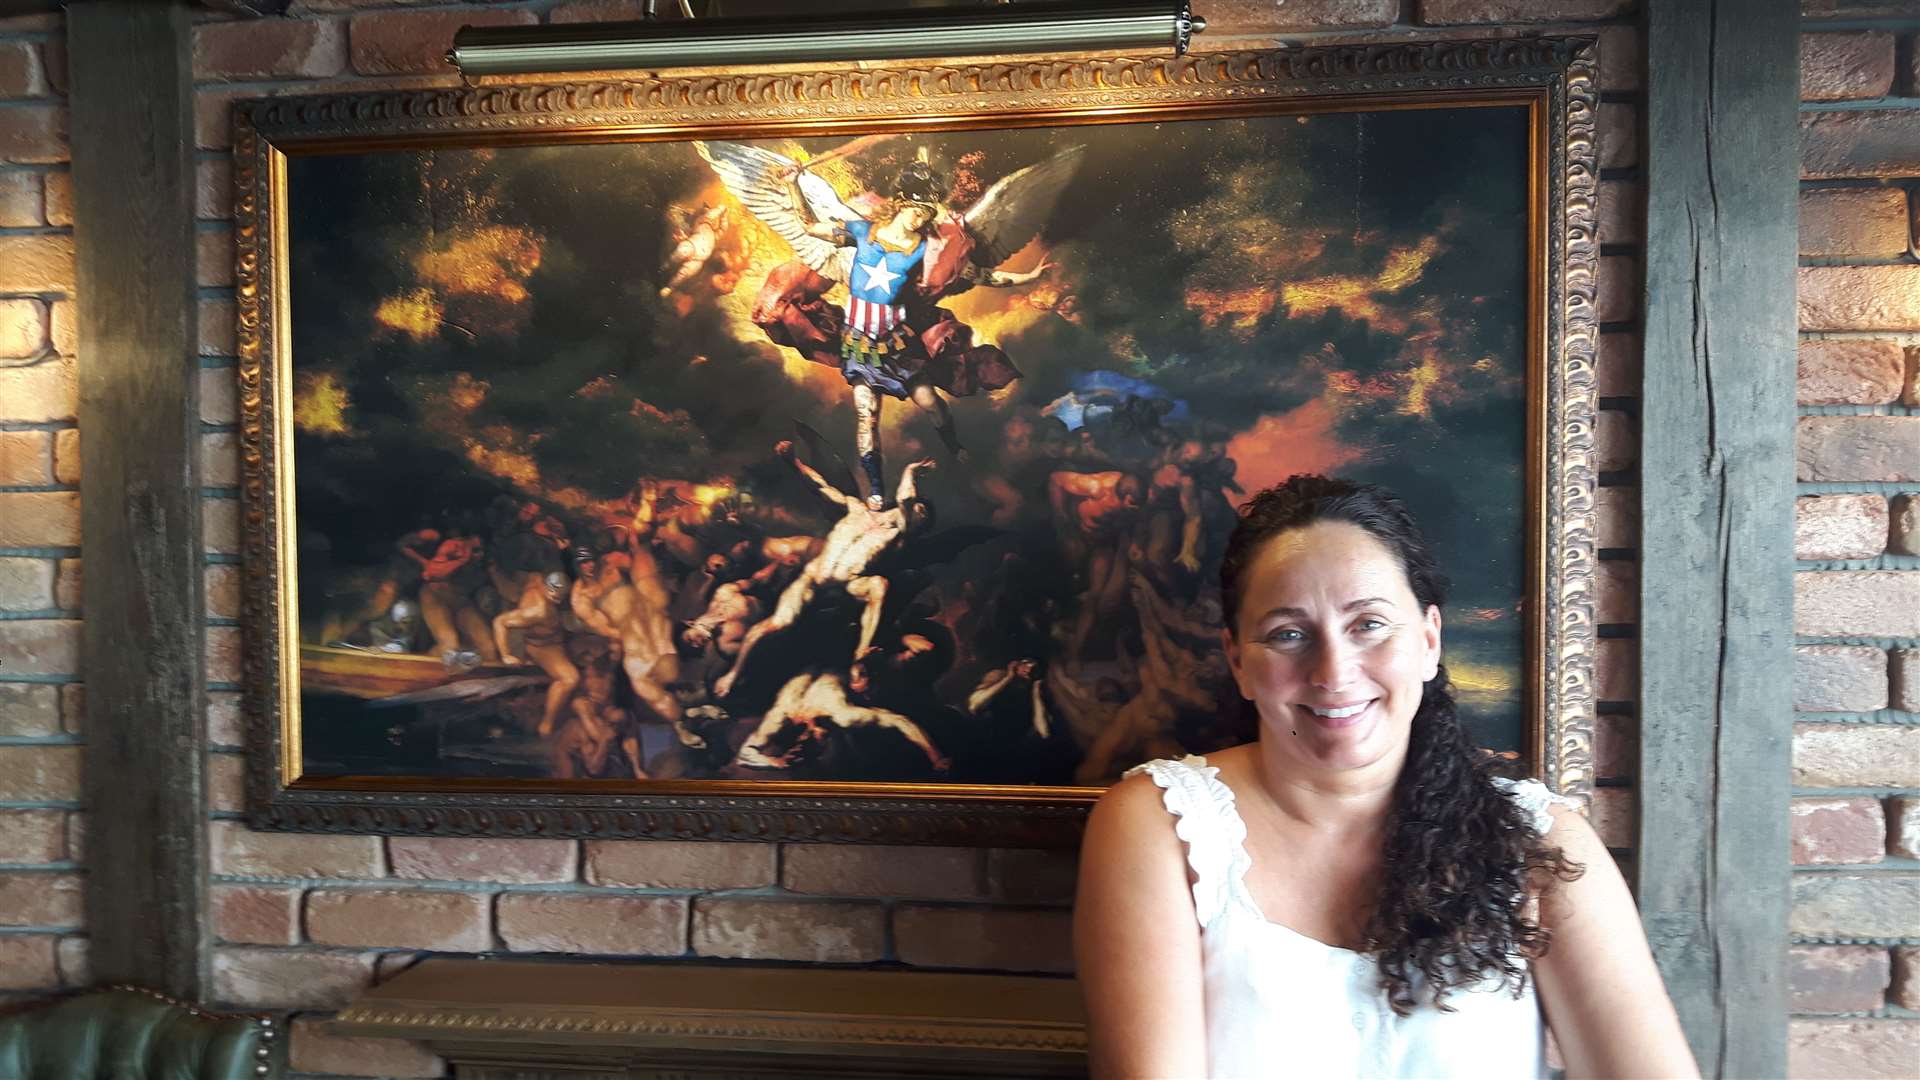 Landlady Sarah O'Quigley in front of one of the paintings by Slasky in the bar